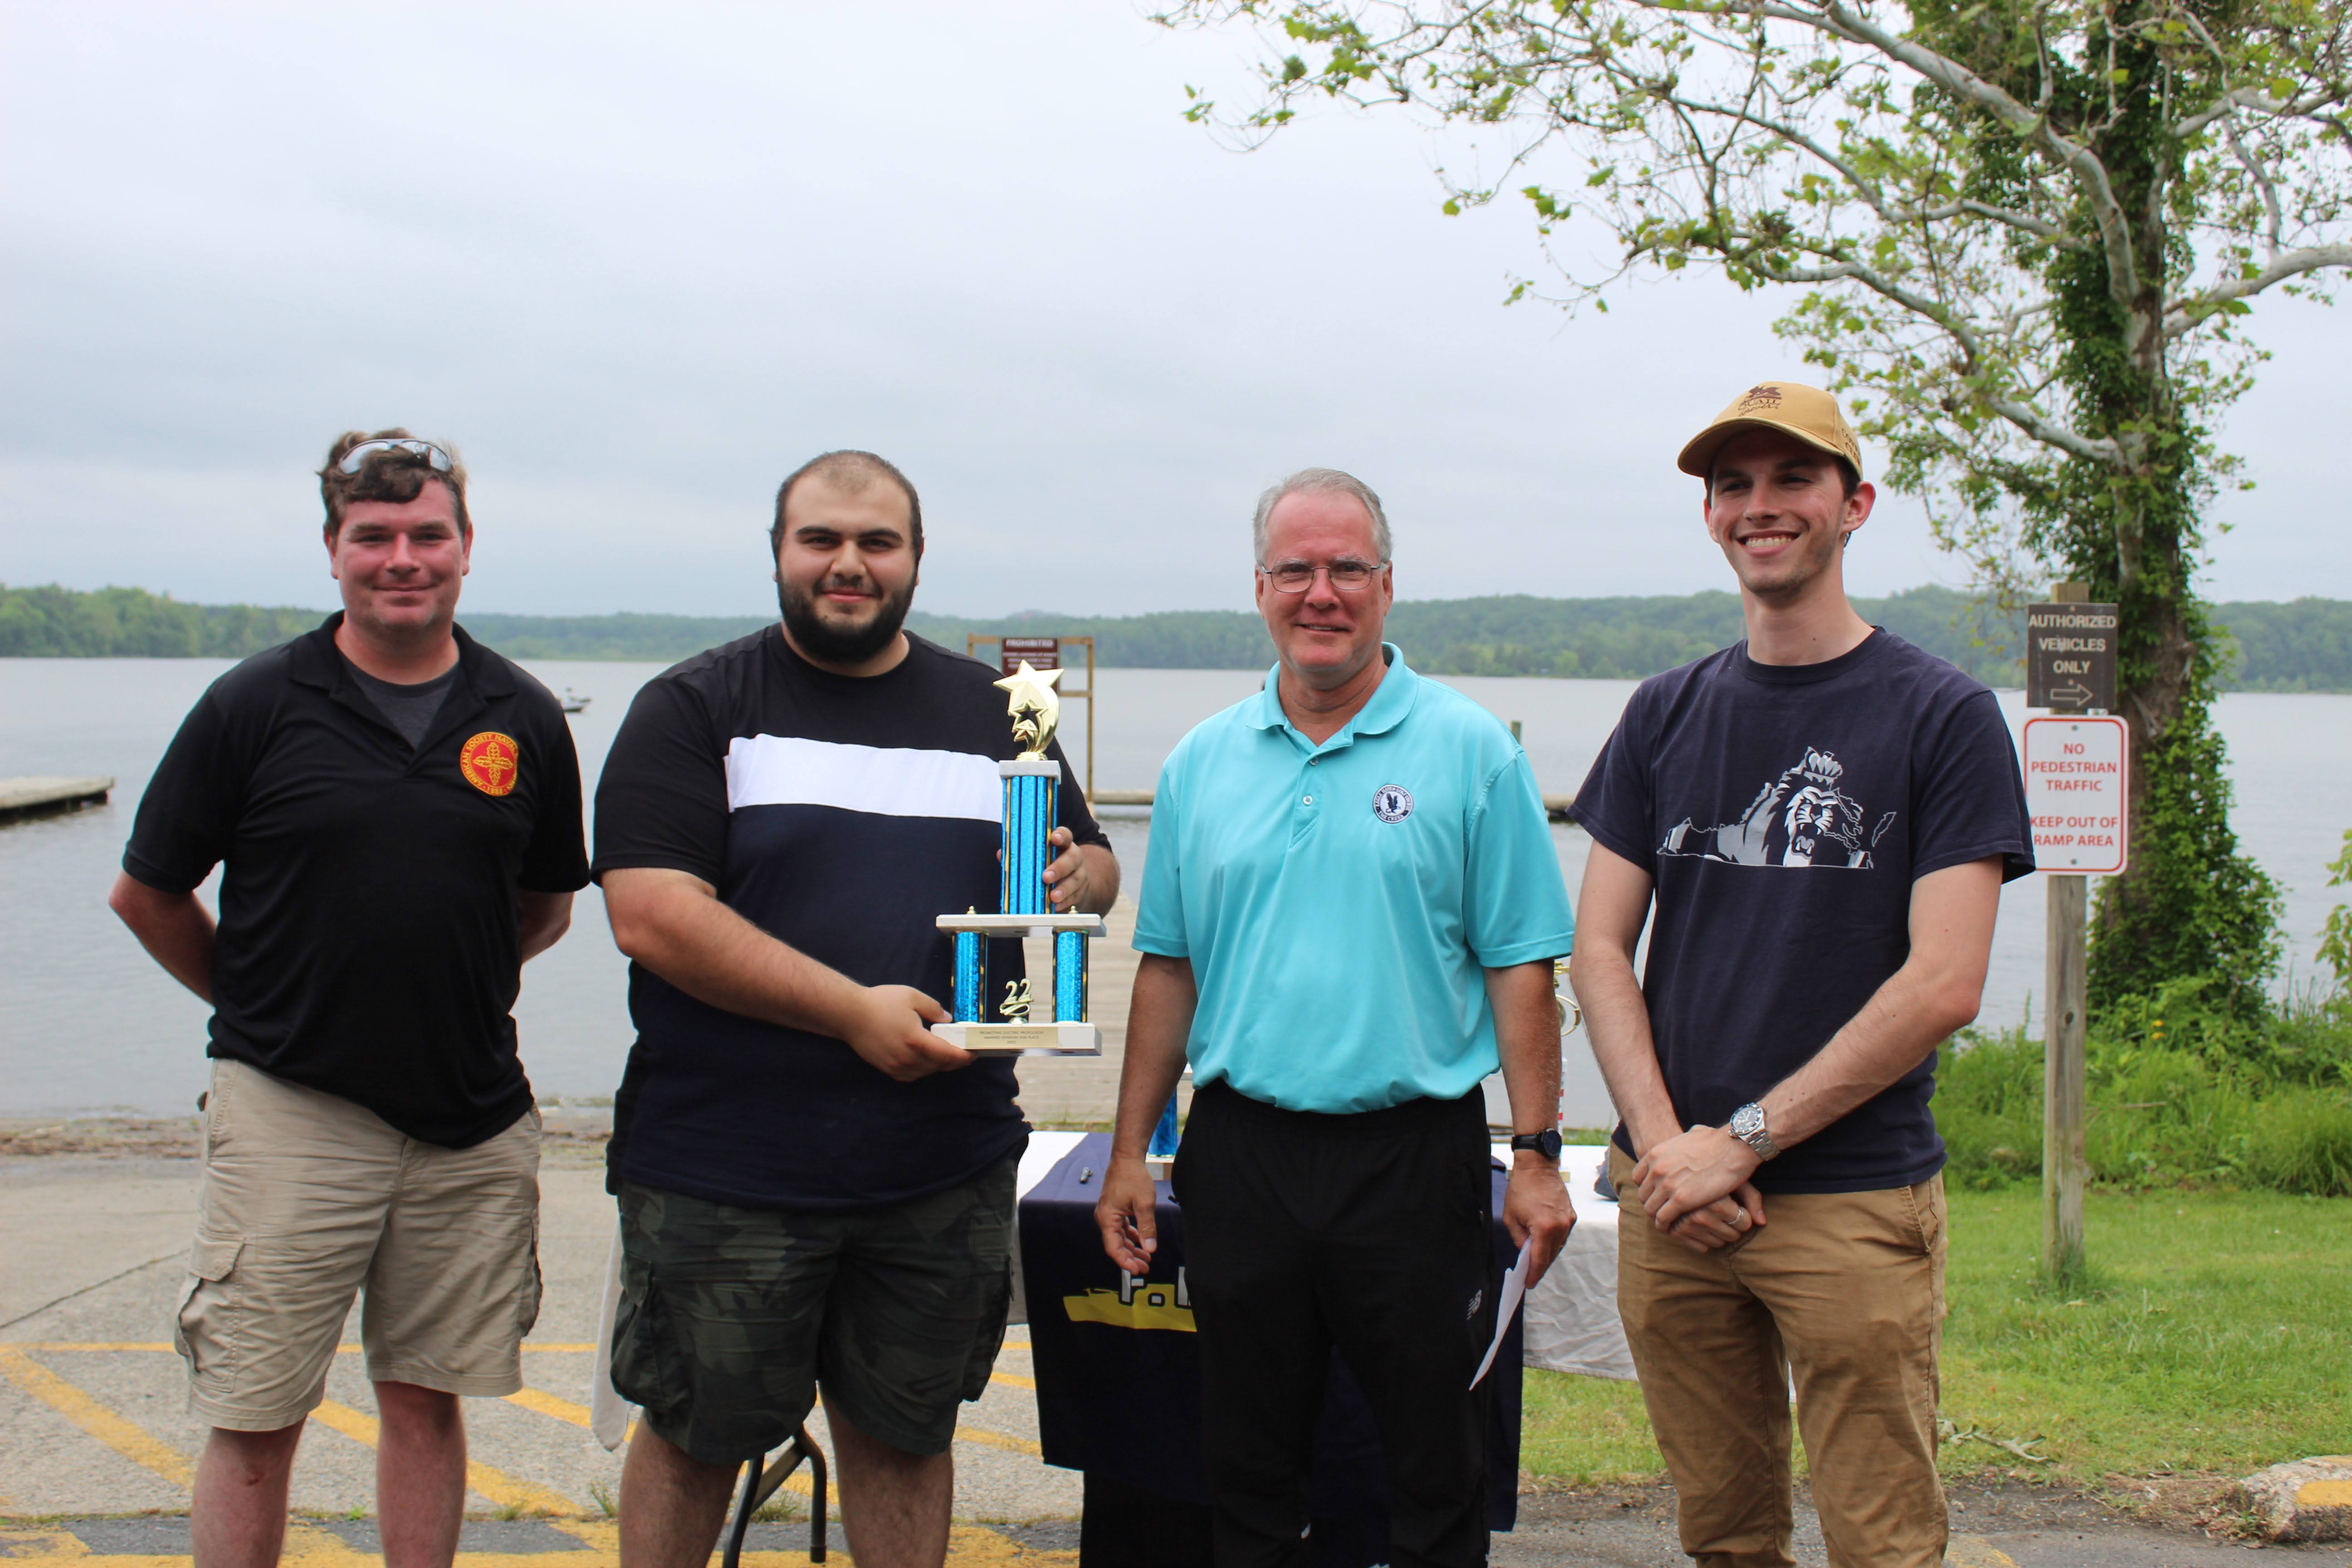 Manned 2nd Place: Old Dominion University